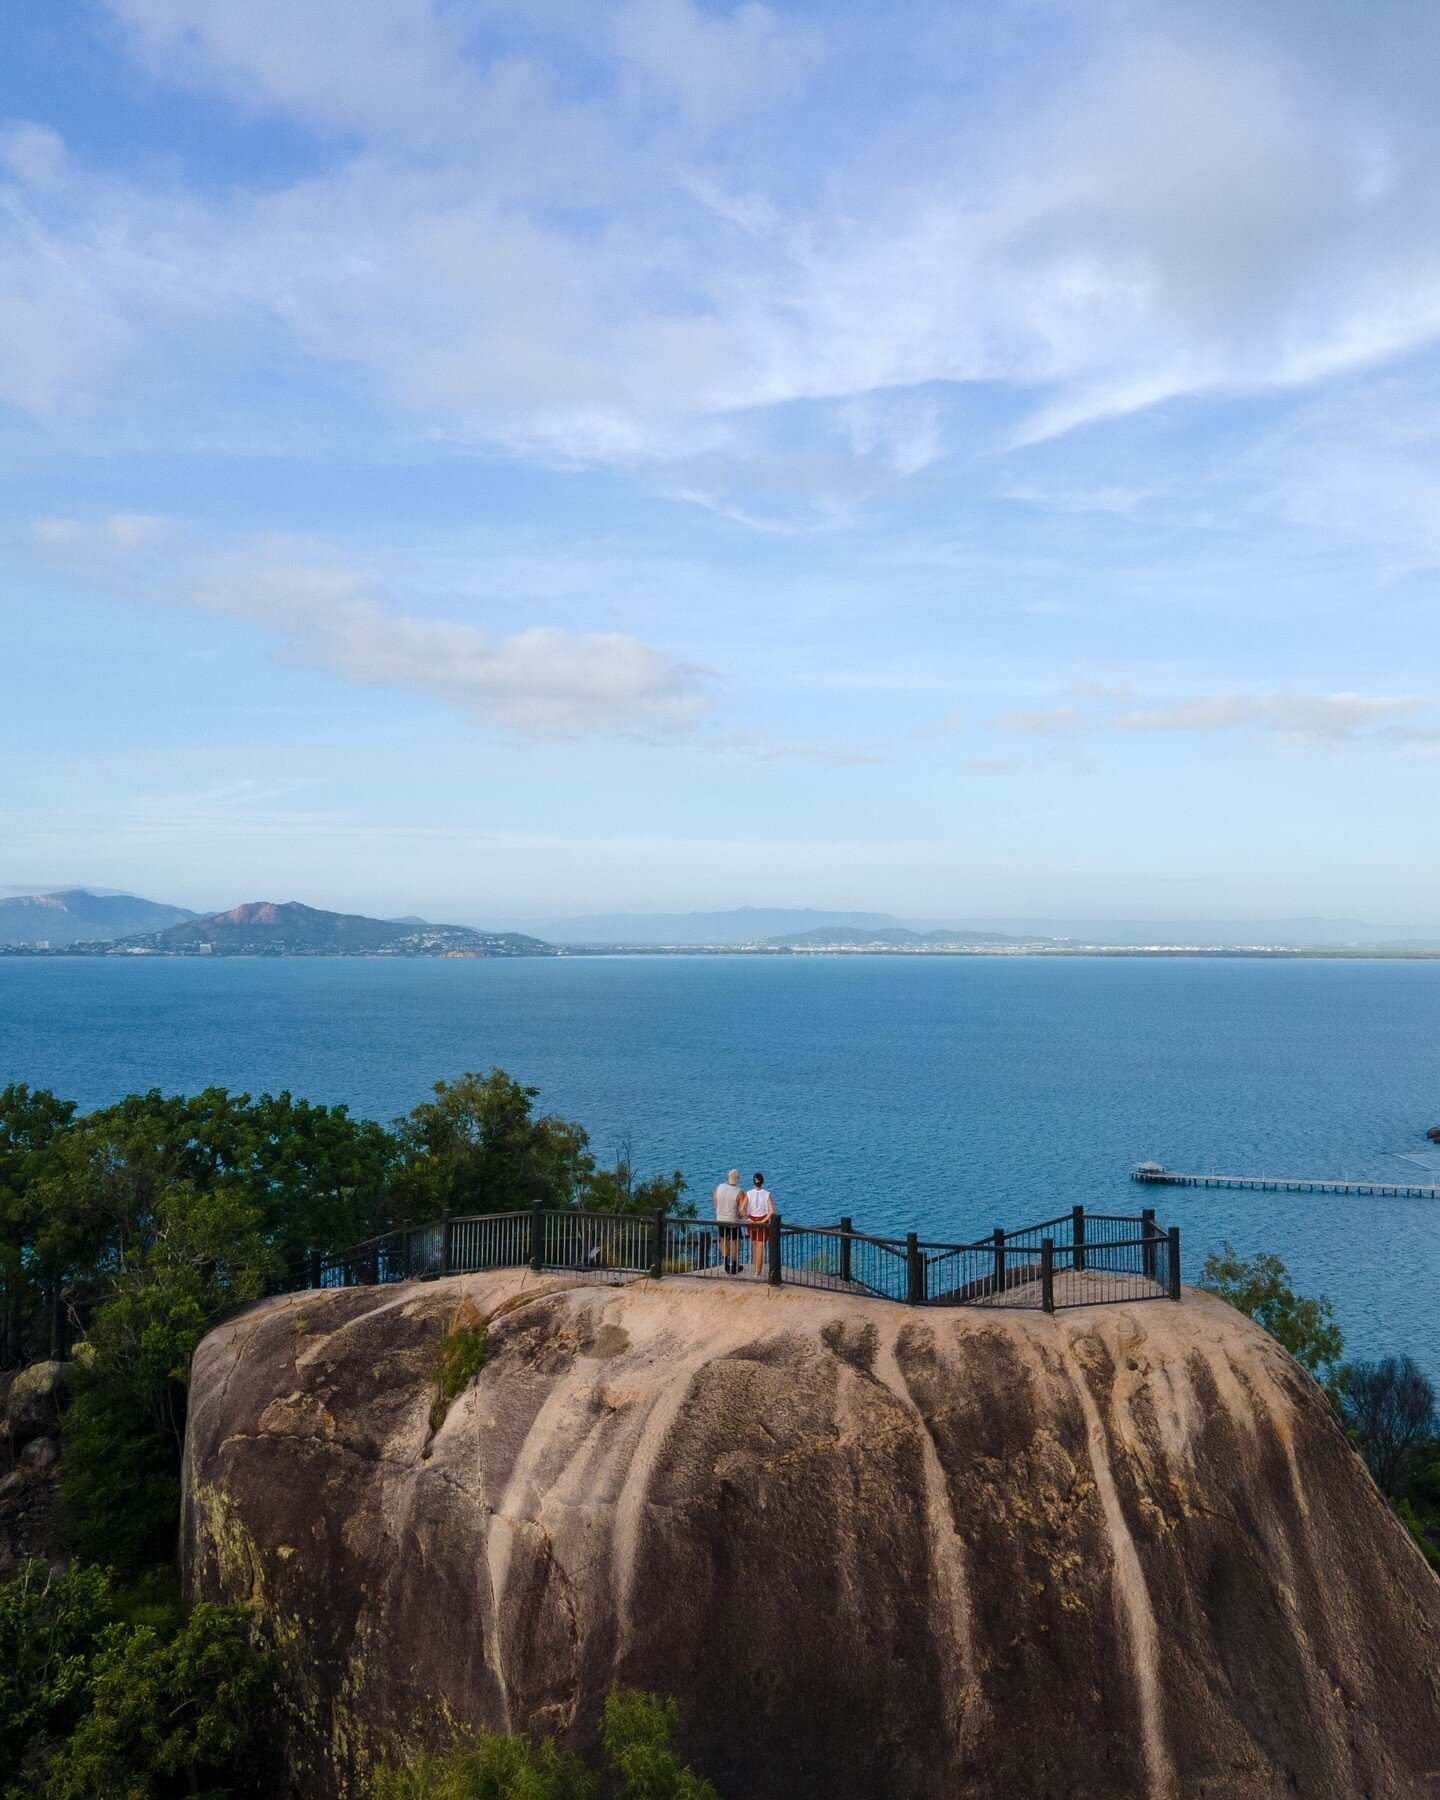 Hawkings Point. ⁠
⁠
The perfect hike for sunrise, sunset, or just a quick adventure. Head to Picnic Street in Picnic Bay to discover why it's my favourite island trail.⁠
⁠
Photo via @drivenorthqueensland⁠
⁠
#thisismagneticisland #upforunexpected #mag